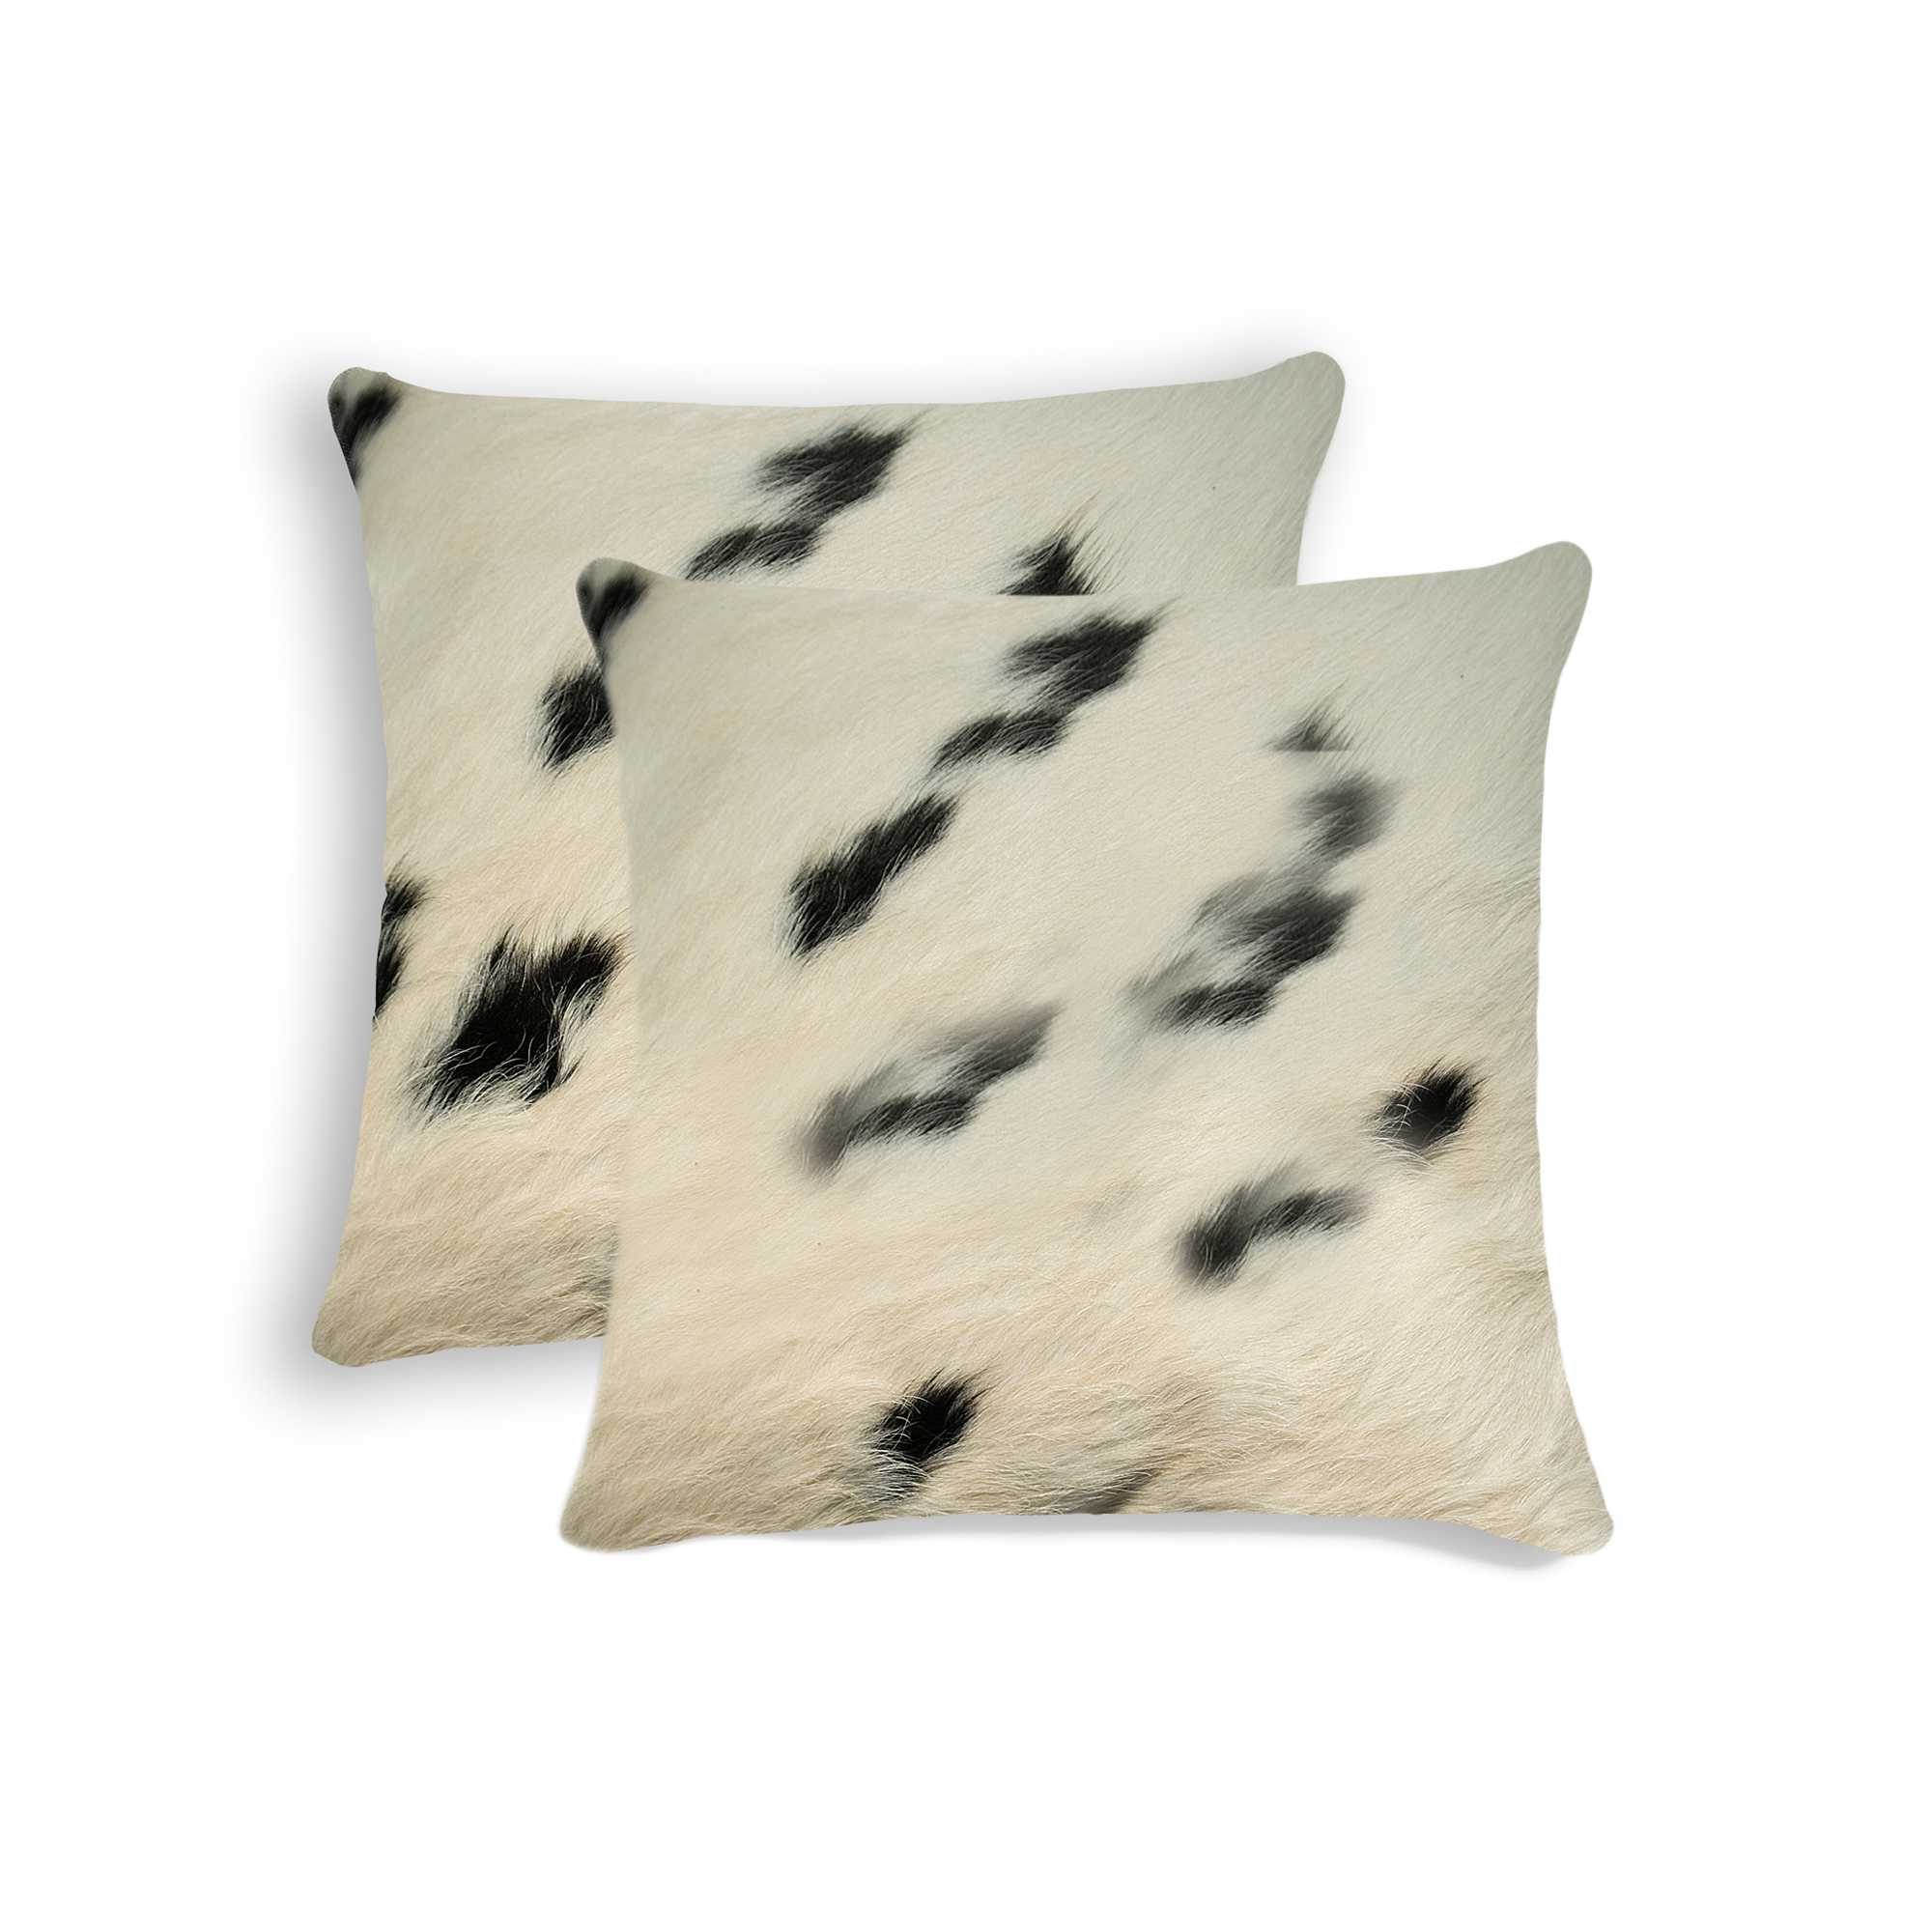 18" x 18" x 5" White And Black Cowhide - Pillow 2-Pack